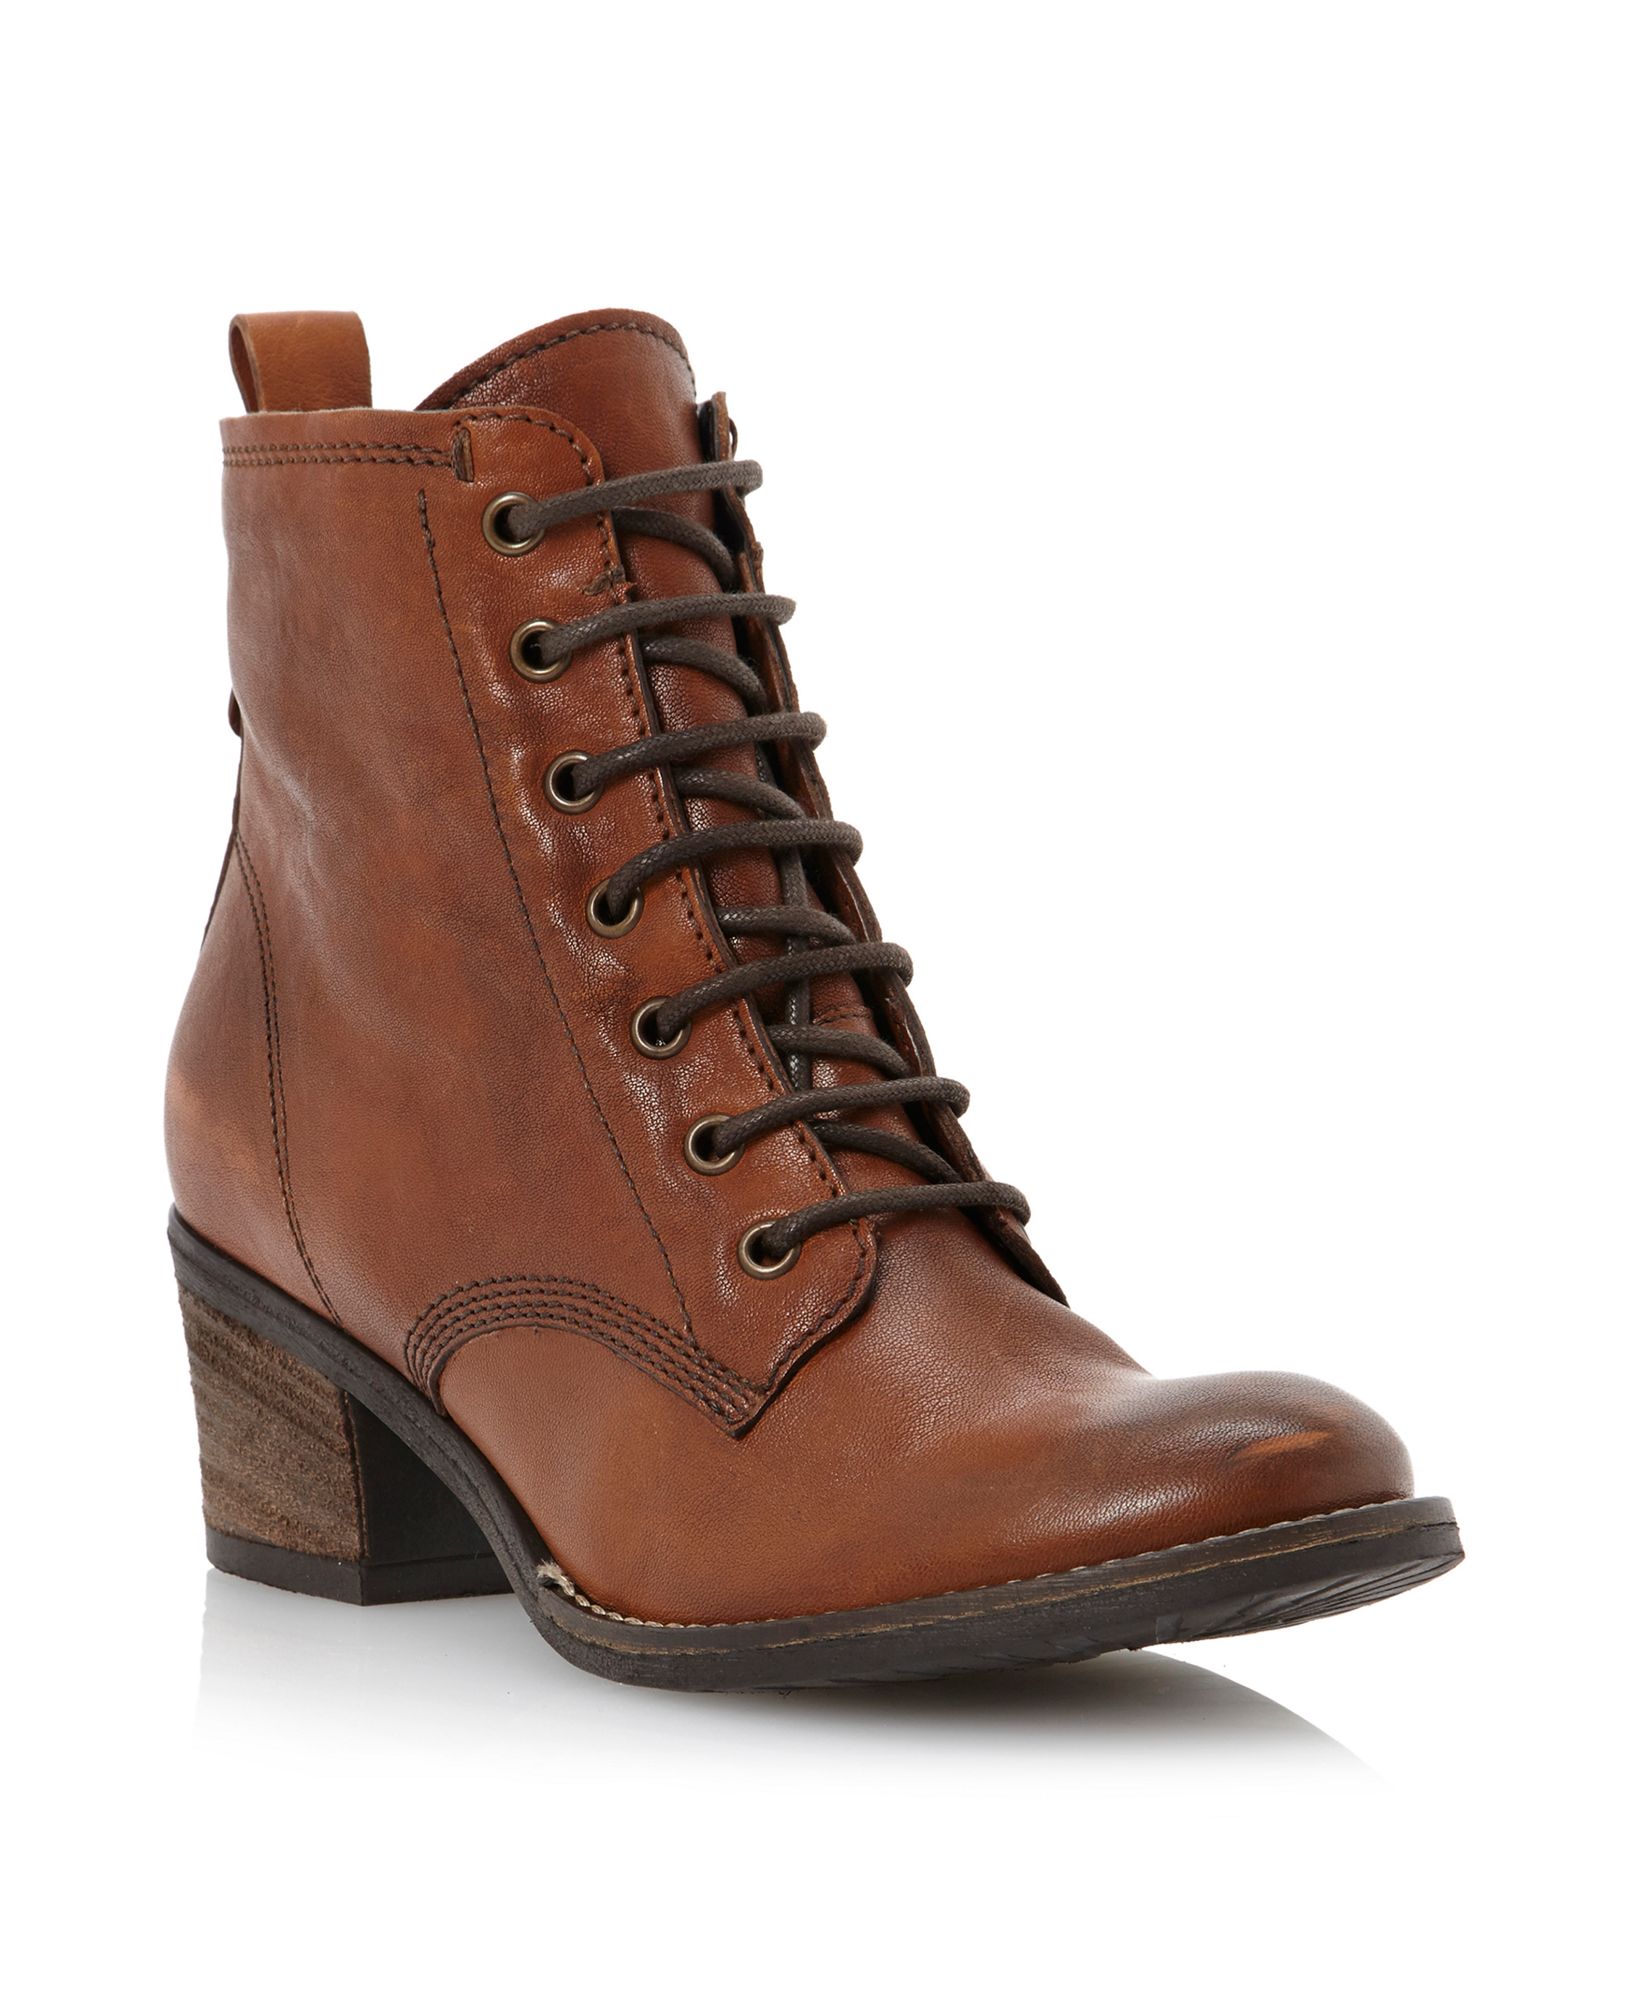 Dune Peetons Leather Boots - For Women in Tan (Brown) - Lyst